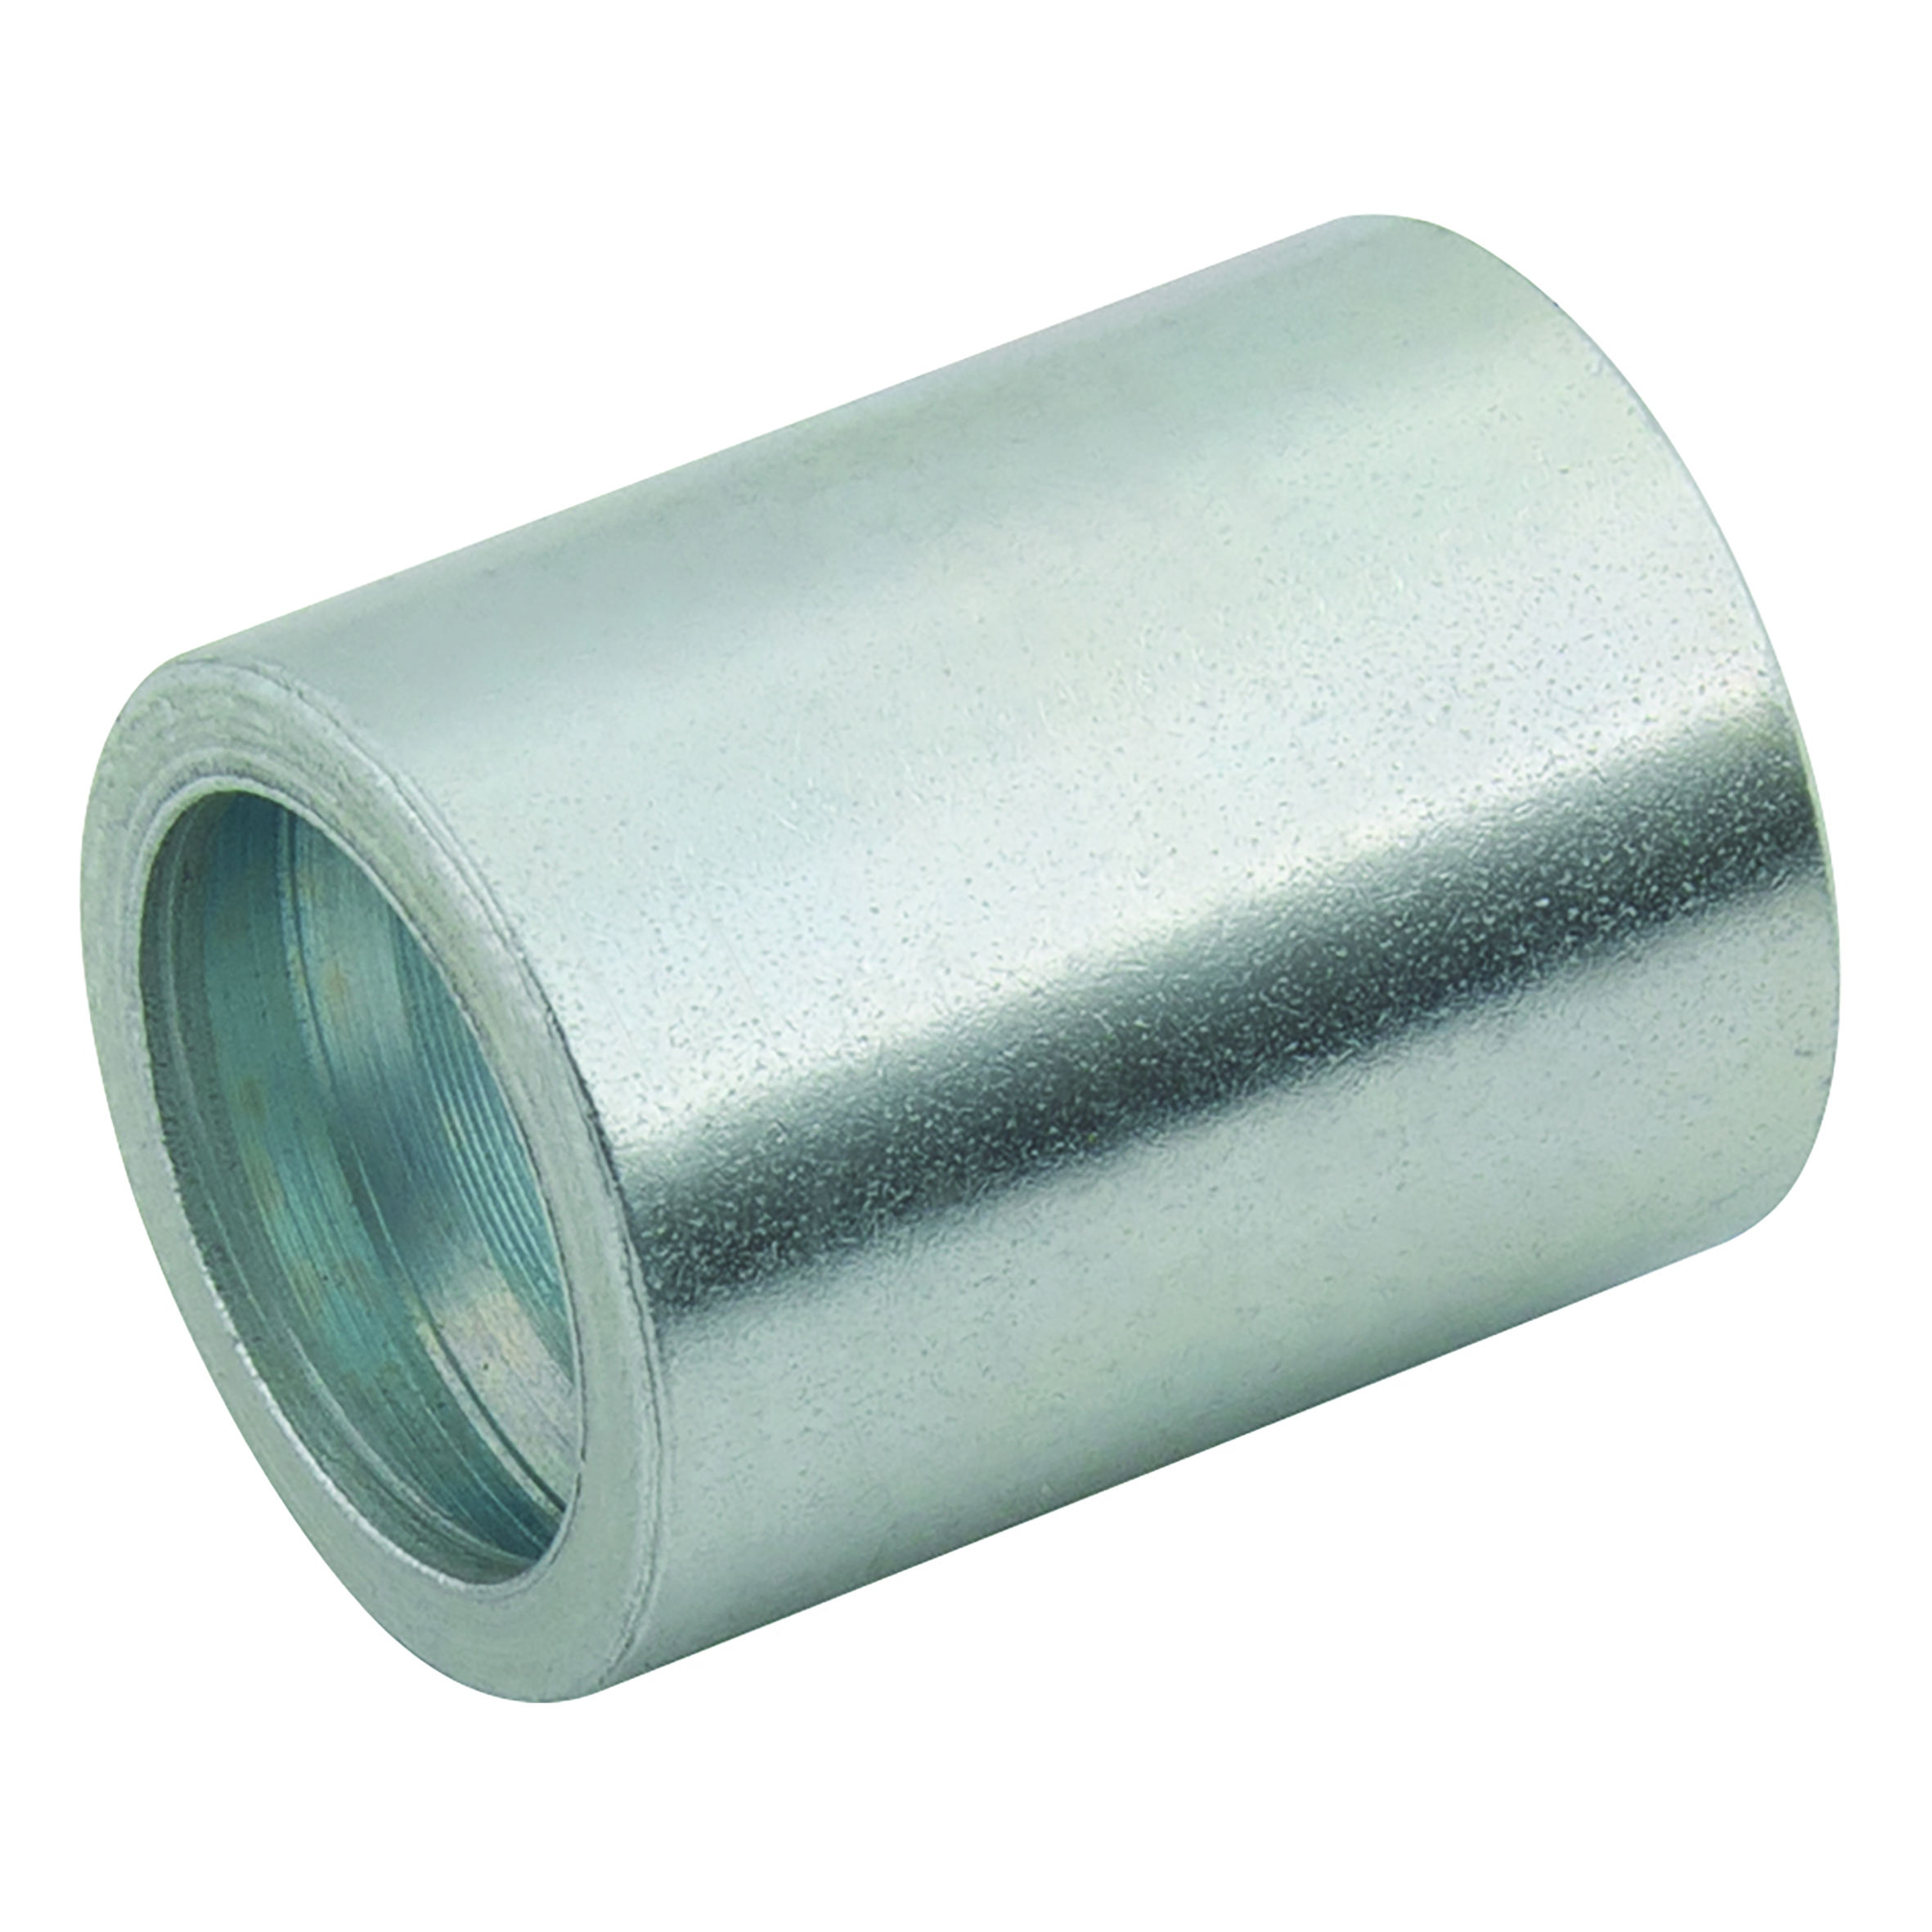 3/16"Hose Insert Ferrule Smooth and Convoluted Bore